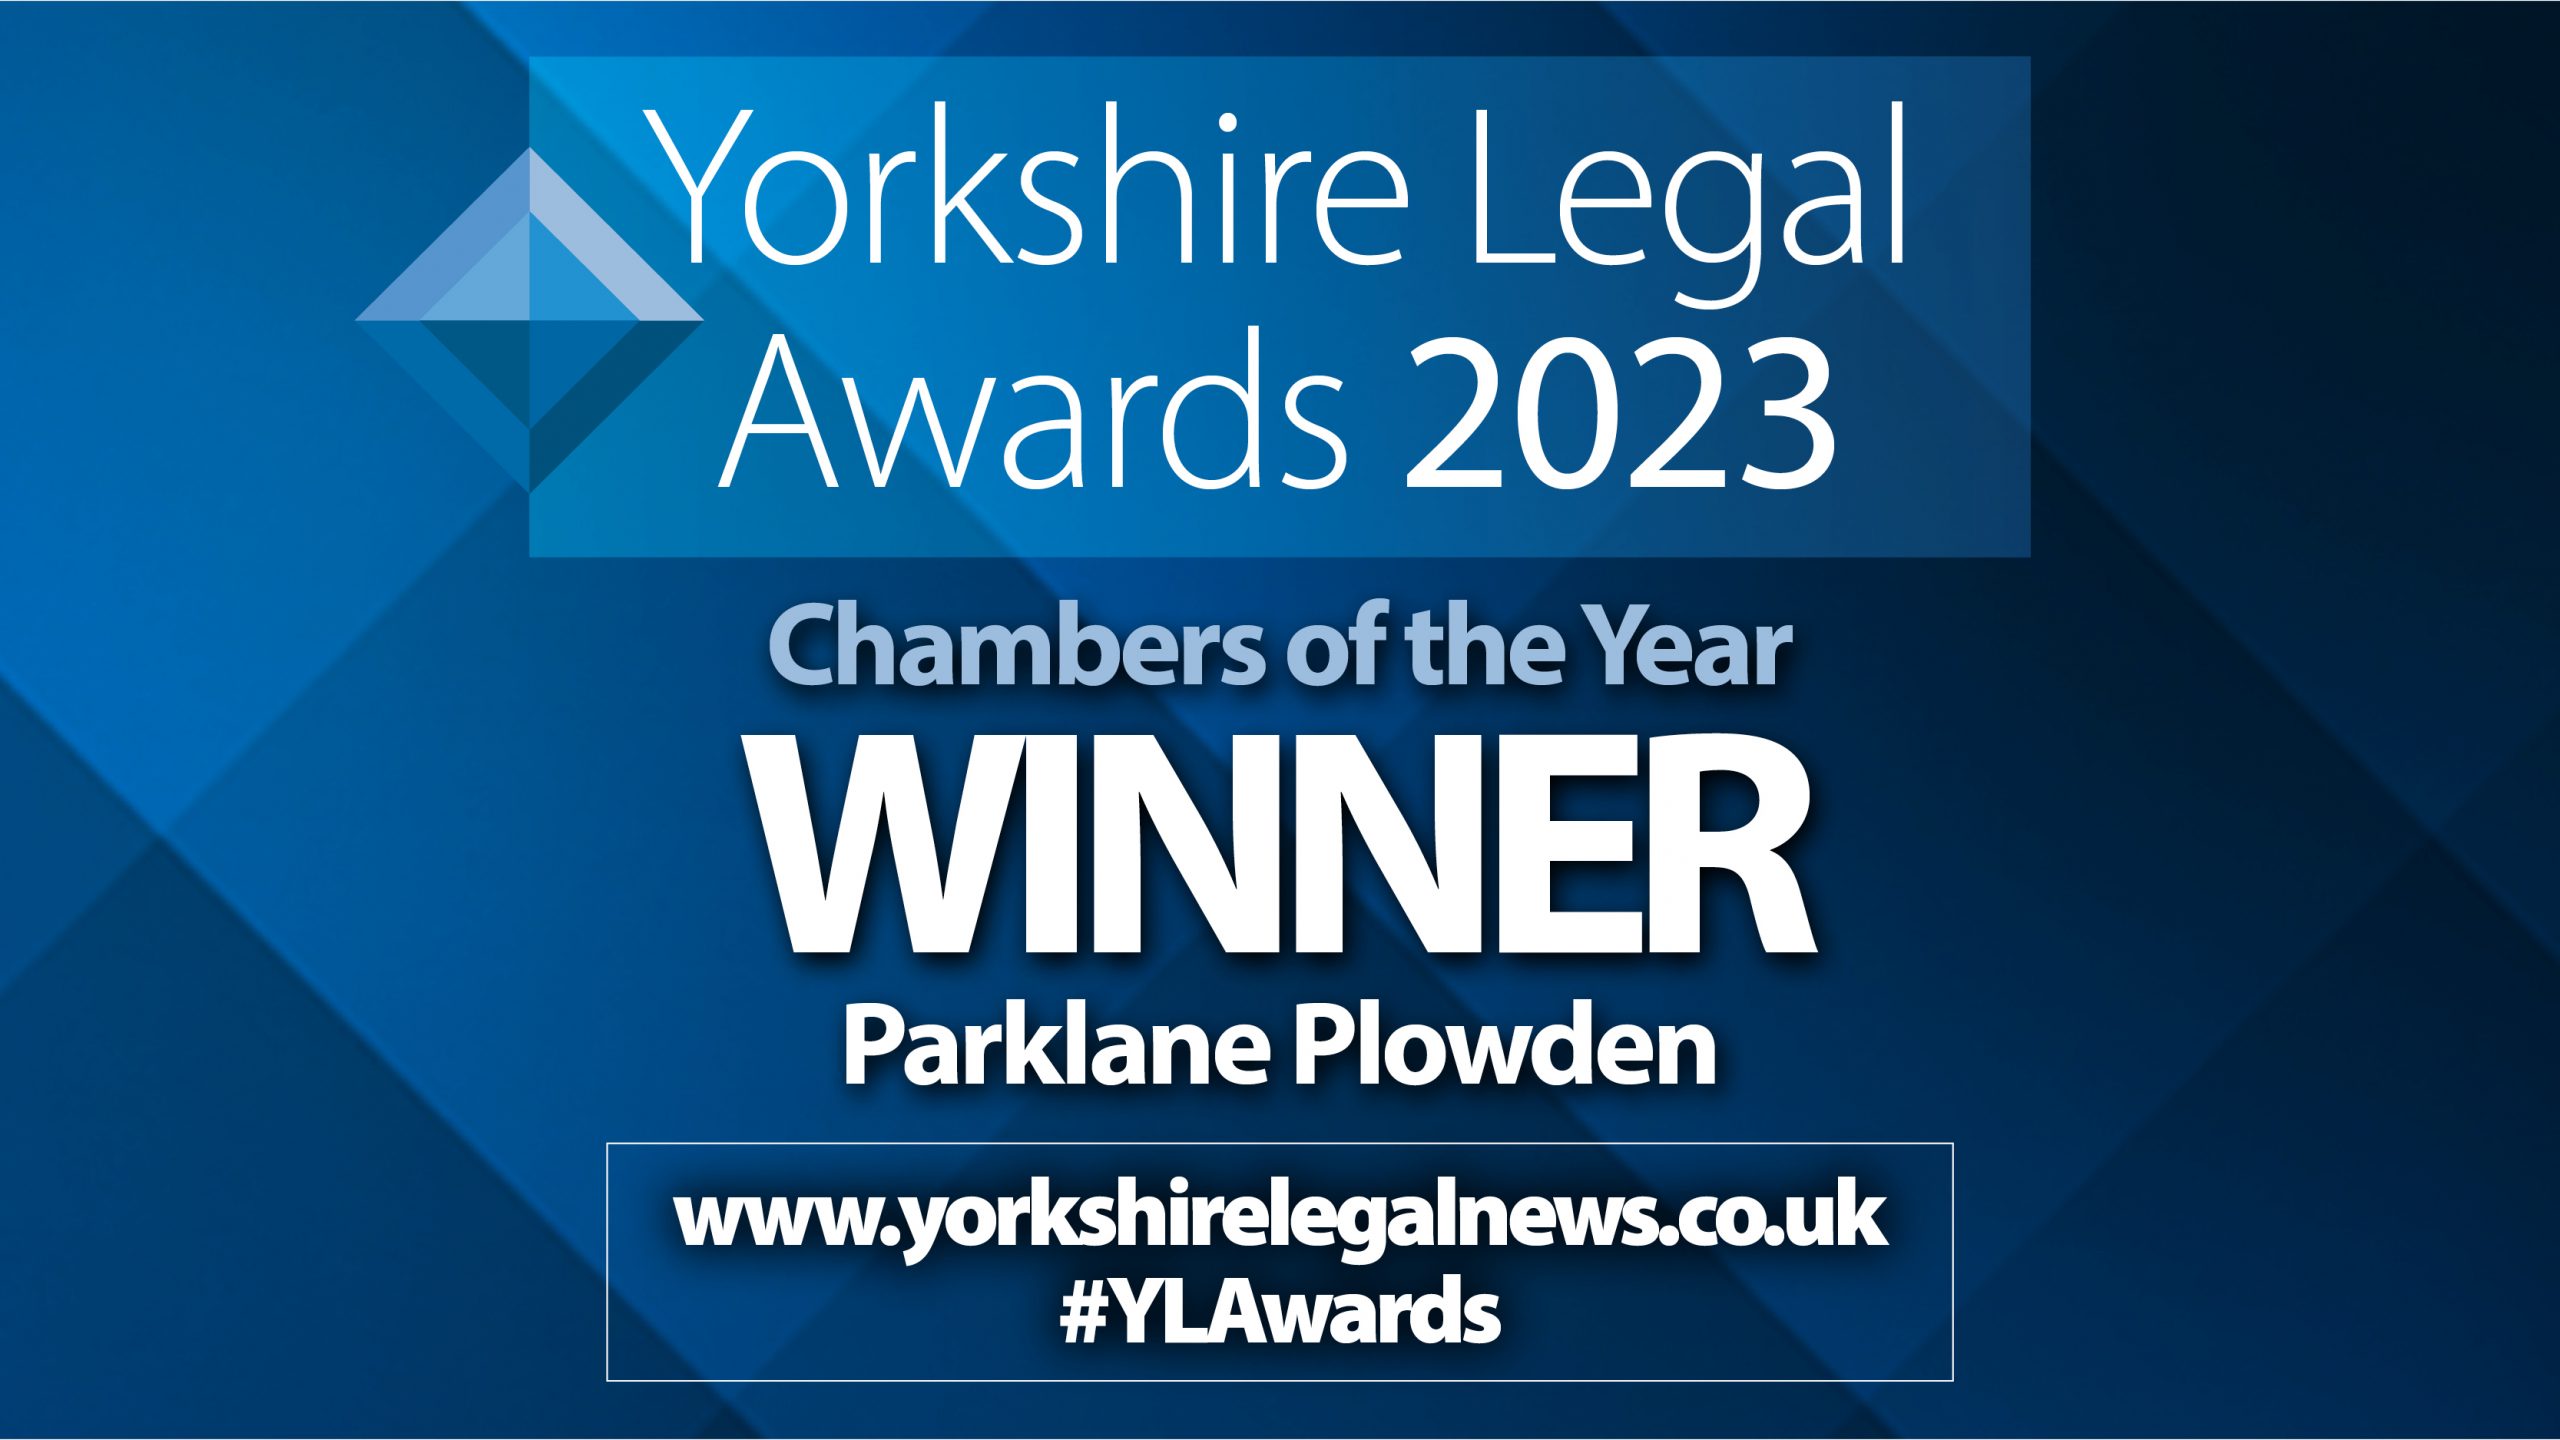 Parklane Plowden win the Chambers of the Year award for the third year in a row at the Yorkshire Legal Awards 2023